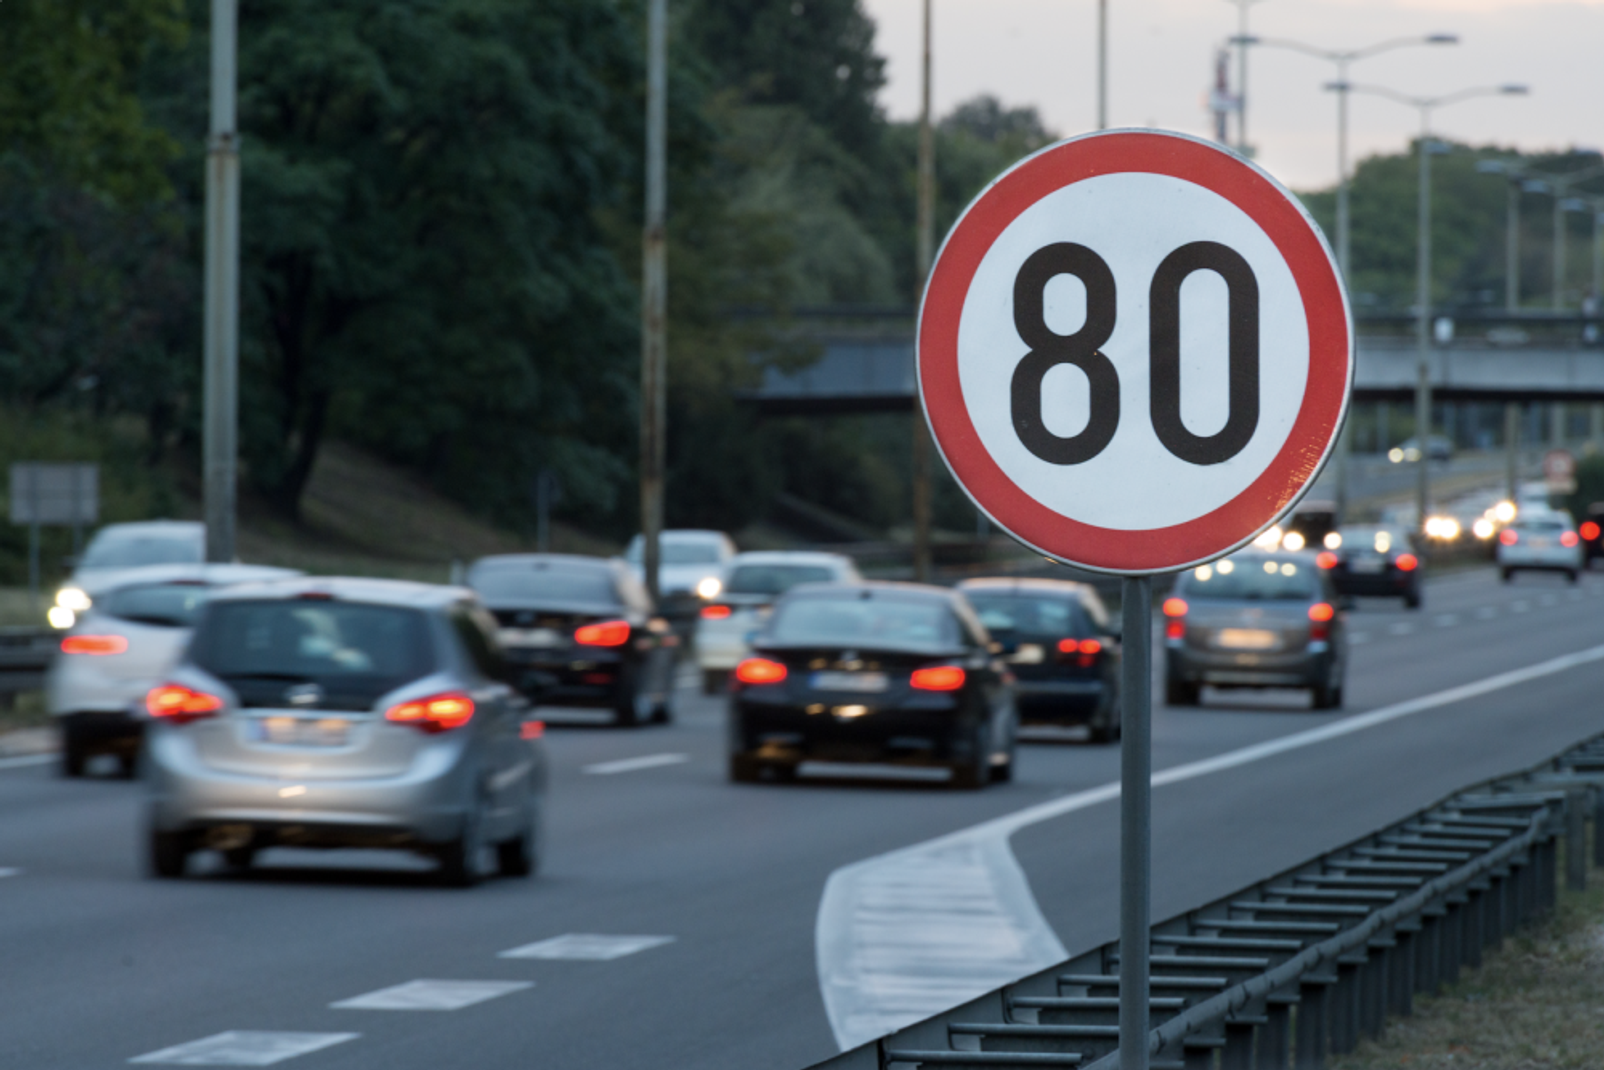 Automatically recognizing traffic signs is the essential first step to helping drivers stay within the legal speed limit.